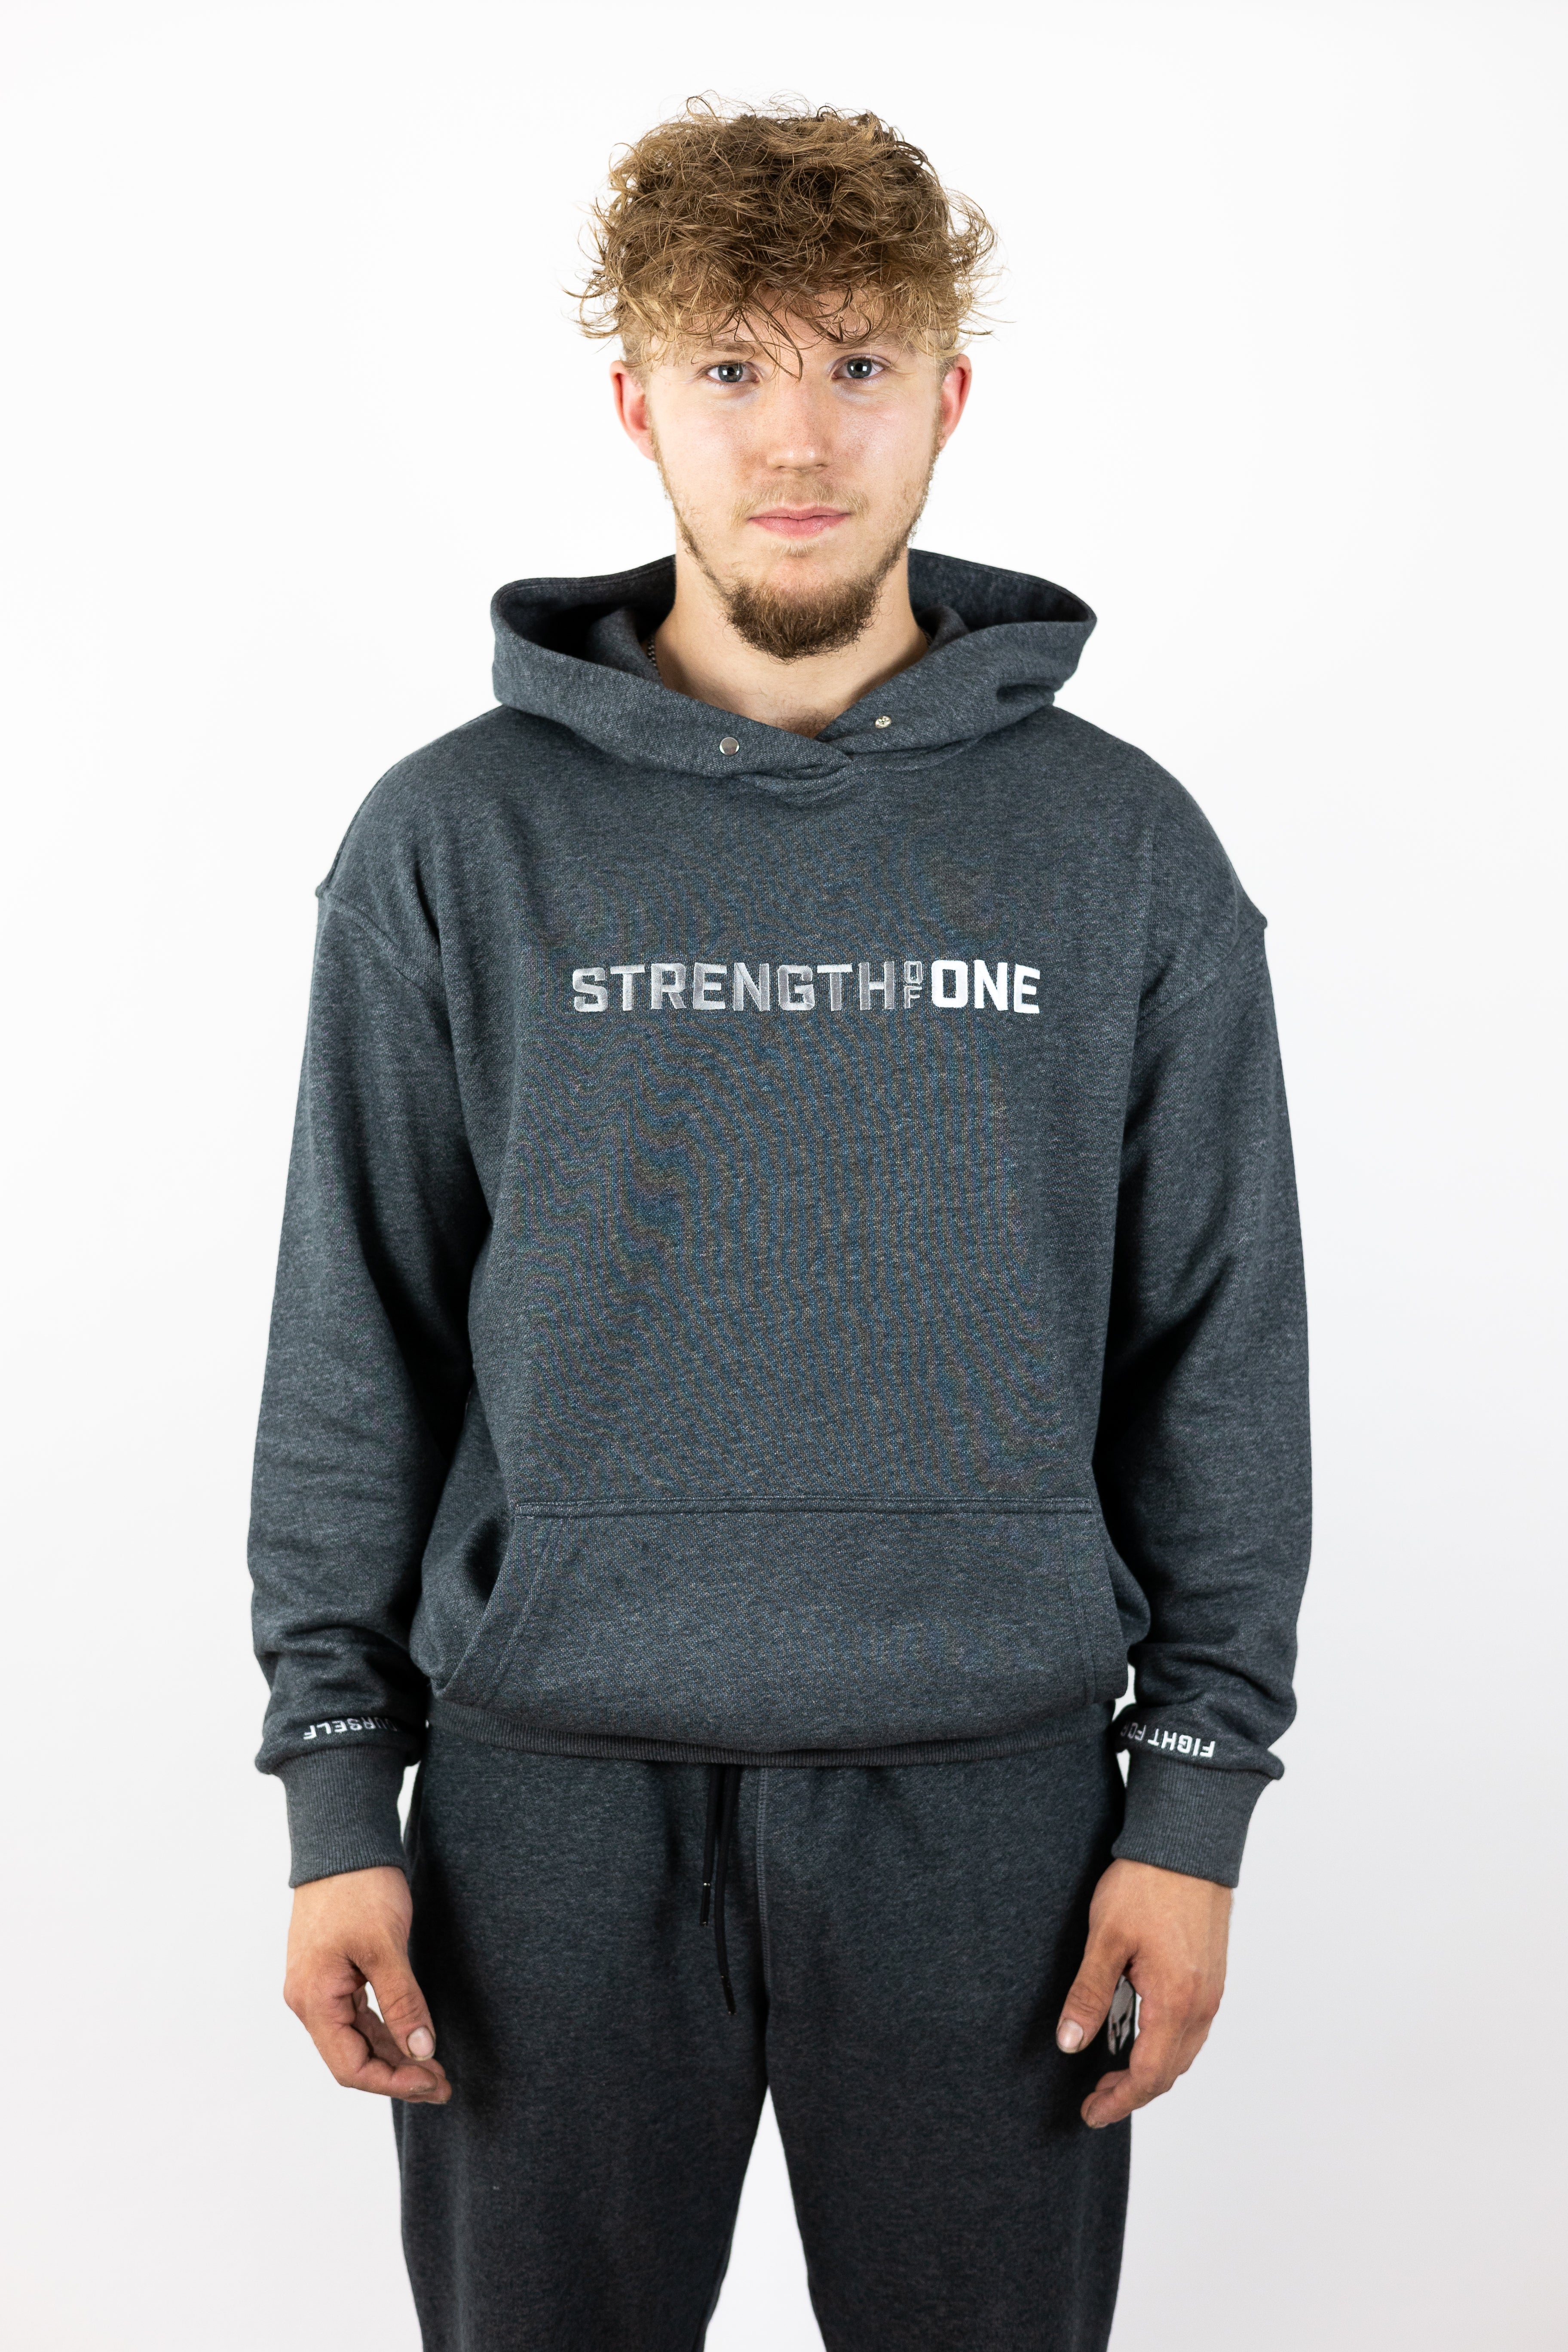 Man standing tall with hands by side and wearing gray hoodie with words Strength of One across chest